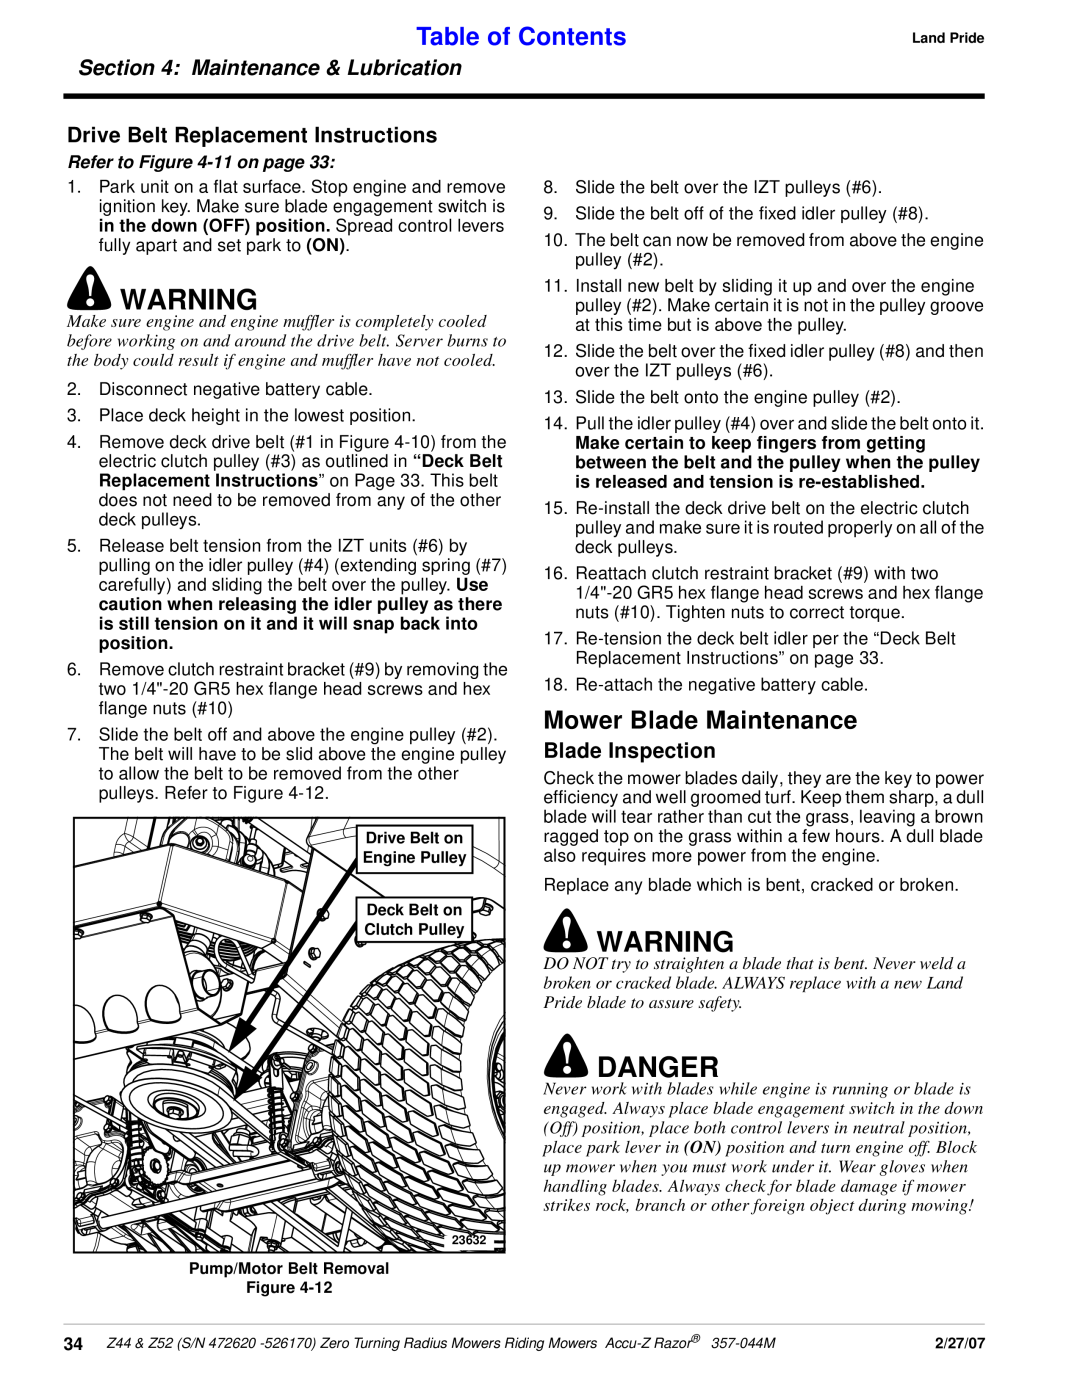 Land Pride 357-044M Mower Blade Maintenance, Drive Belt Replacement Instructions, Blade Inspection, Refer to -11 on page 